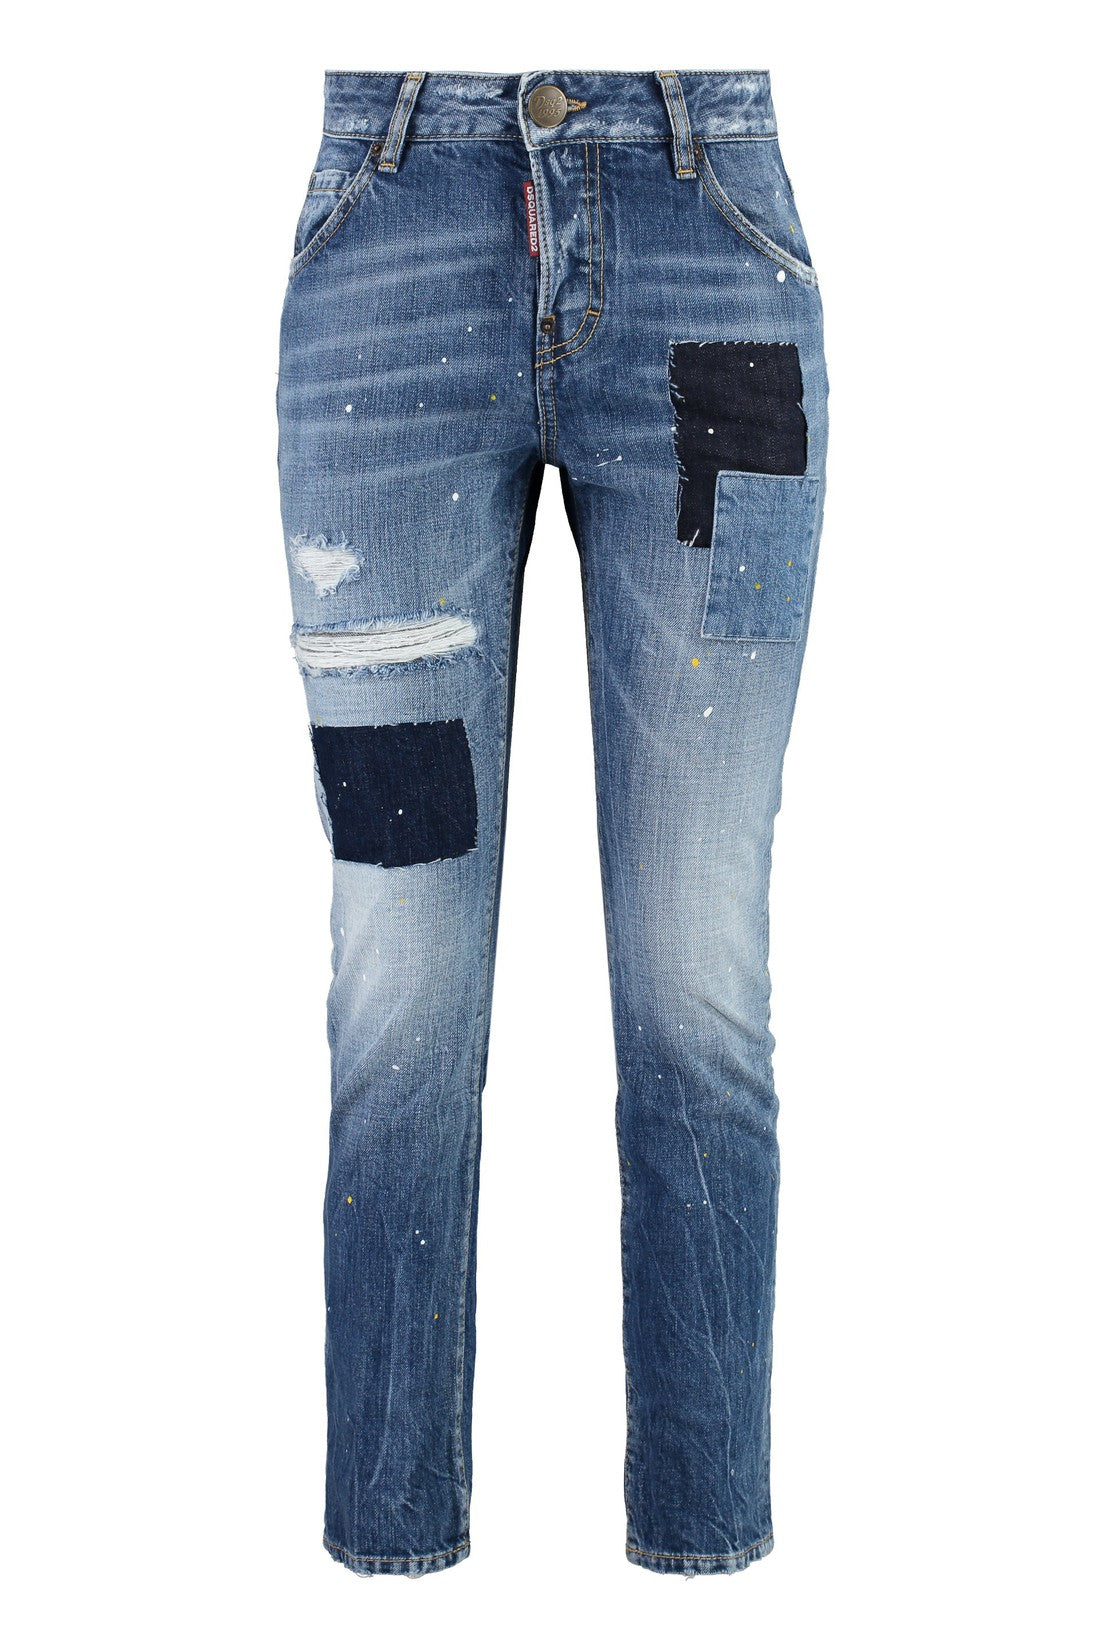 Dsquared2-OUTLET-SALE-Cool Girl cropped jeans-ARCHIVIST